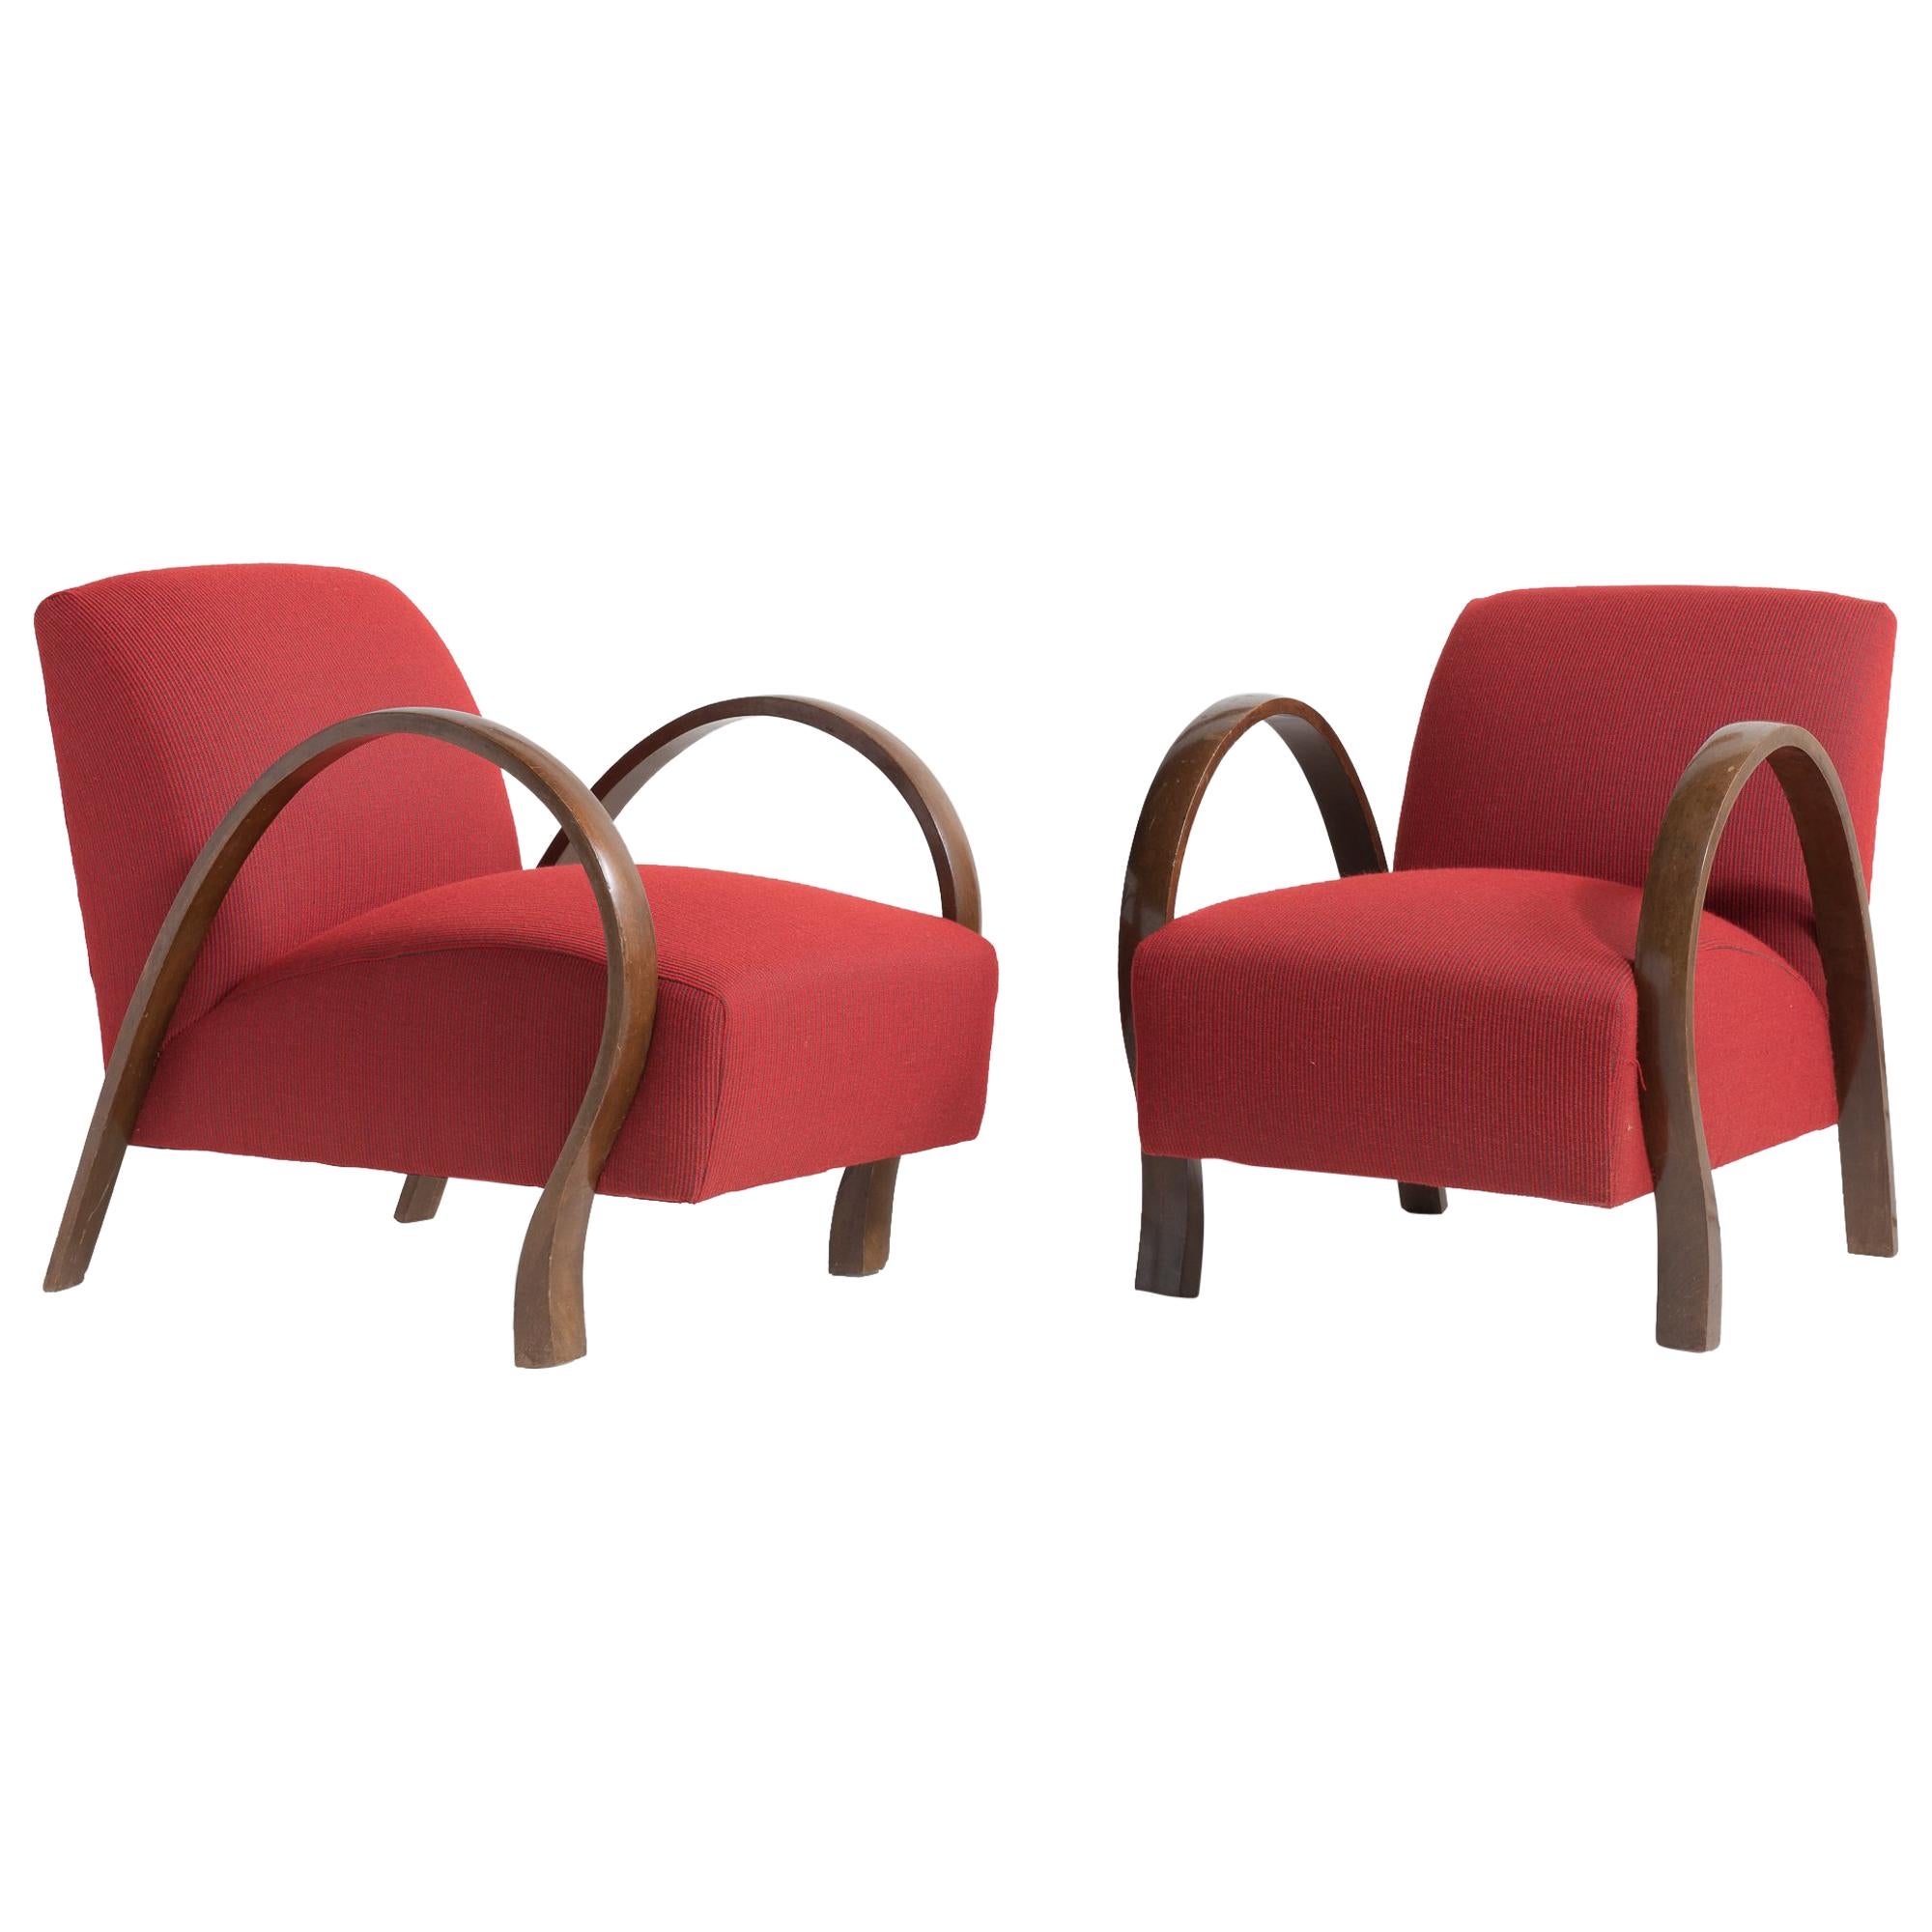 Pair of Bentwood Armchairs, Italy, circa 1930